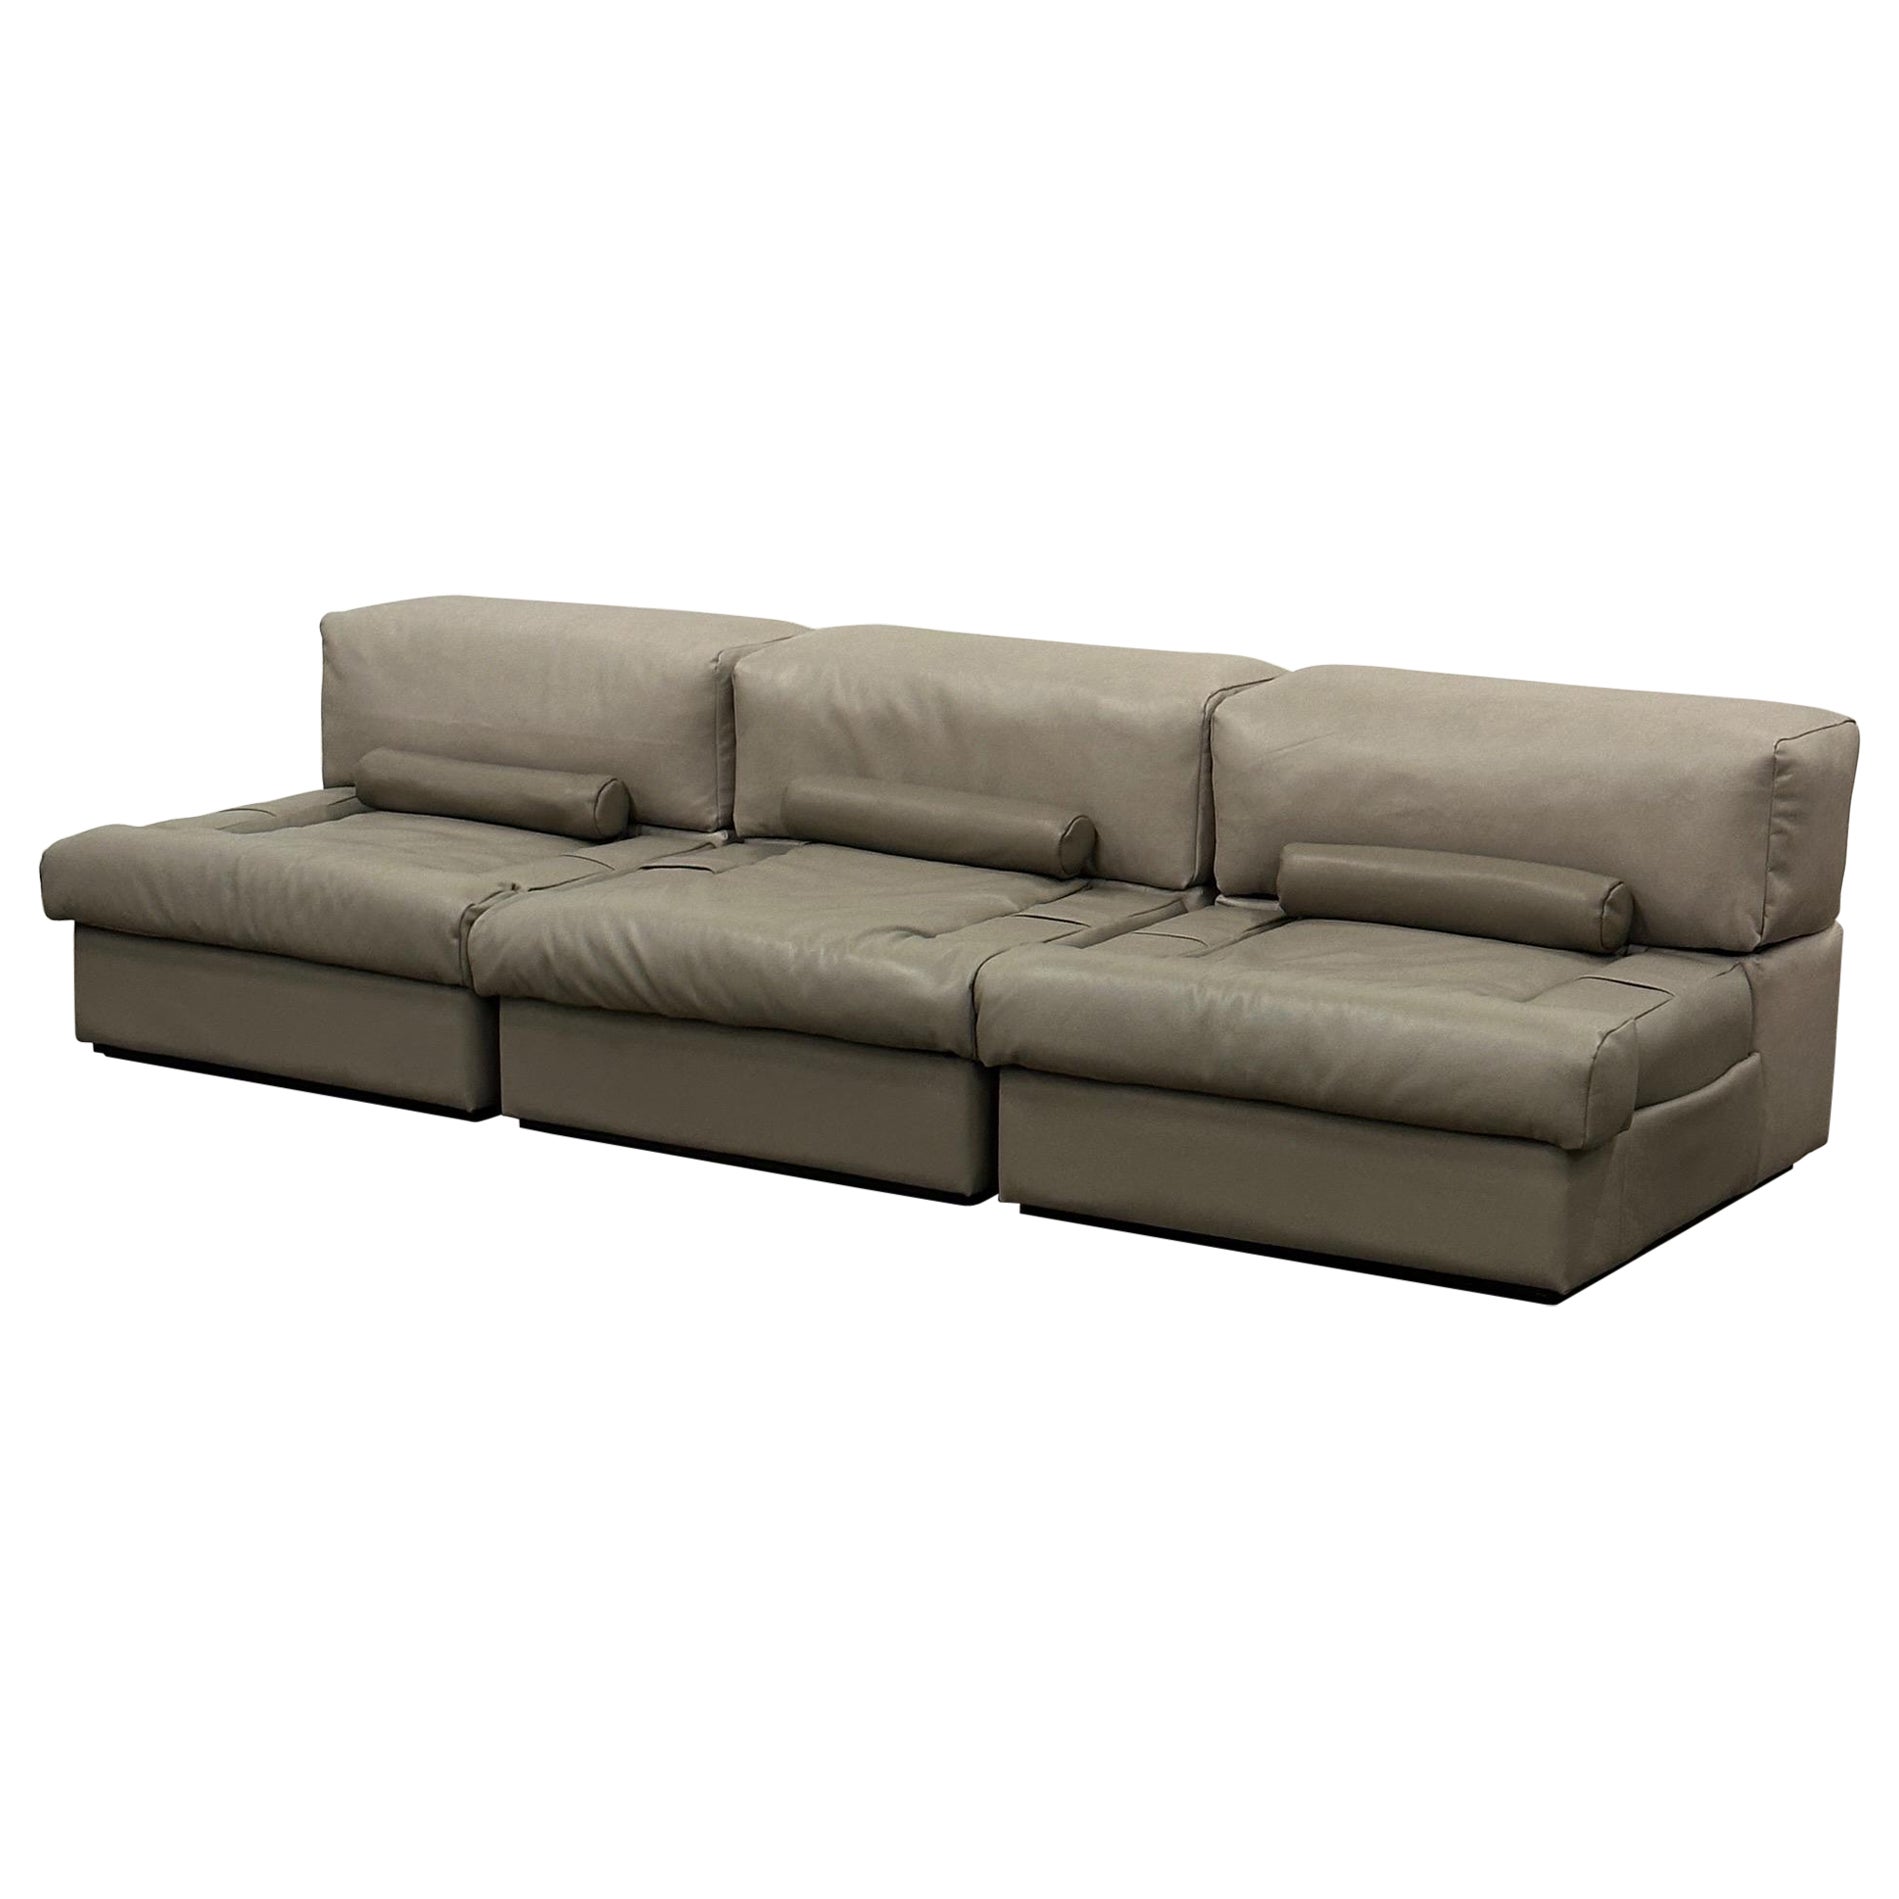 Brazilian Modular Leather Sofa/Chairs by Percival Lafer For Sale